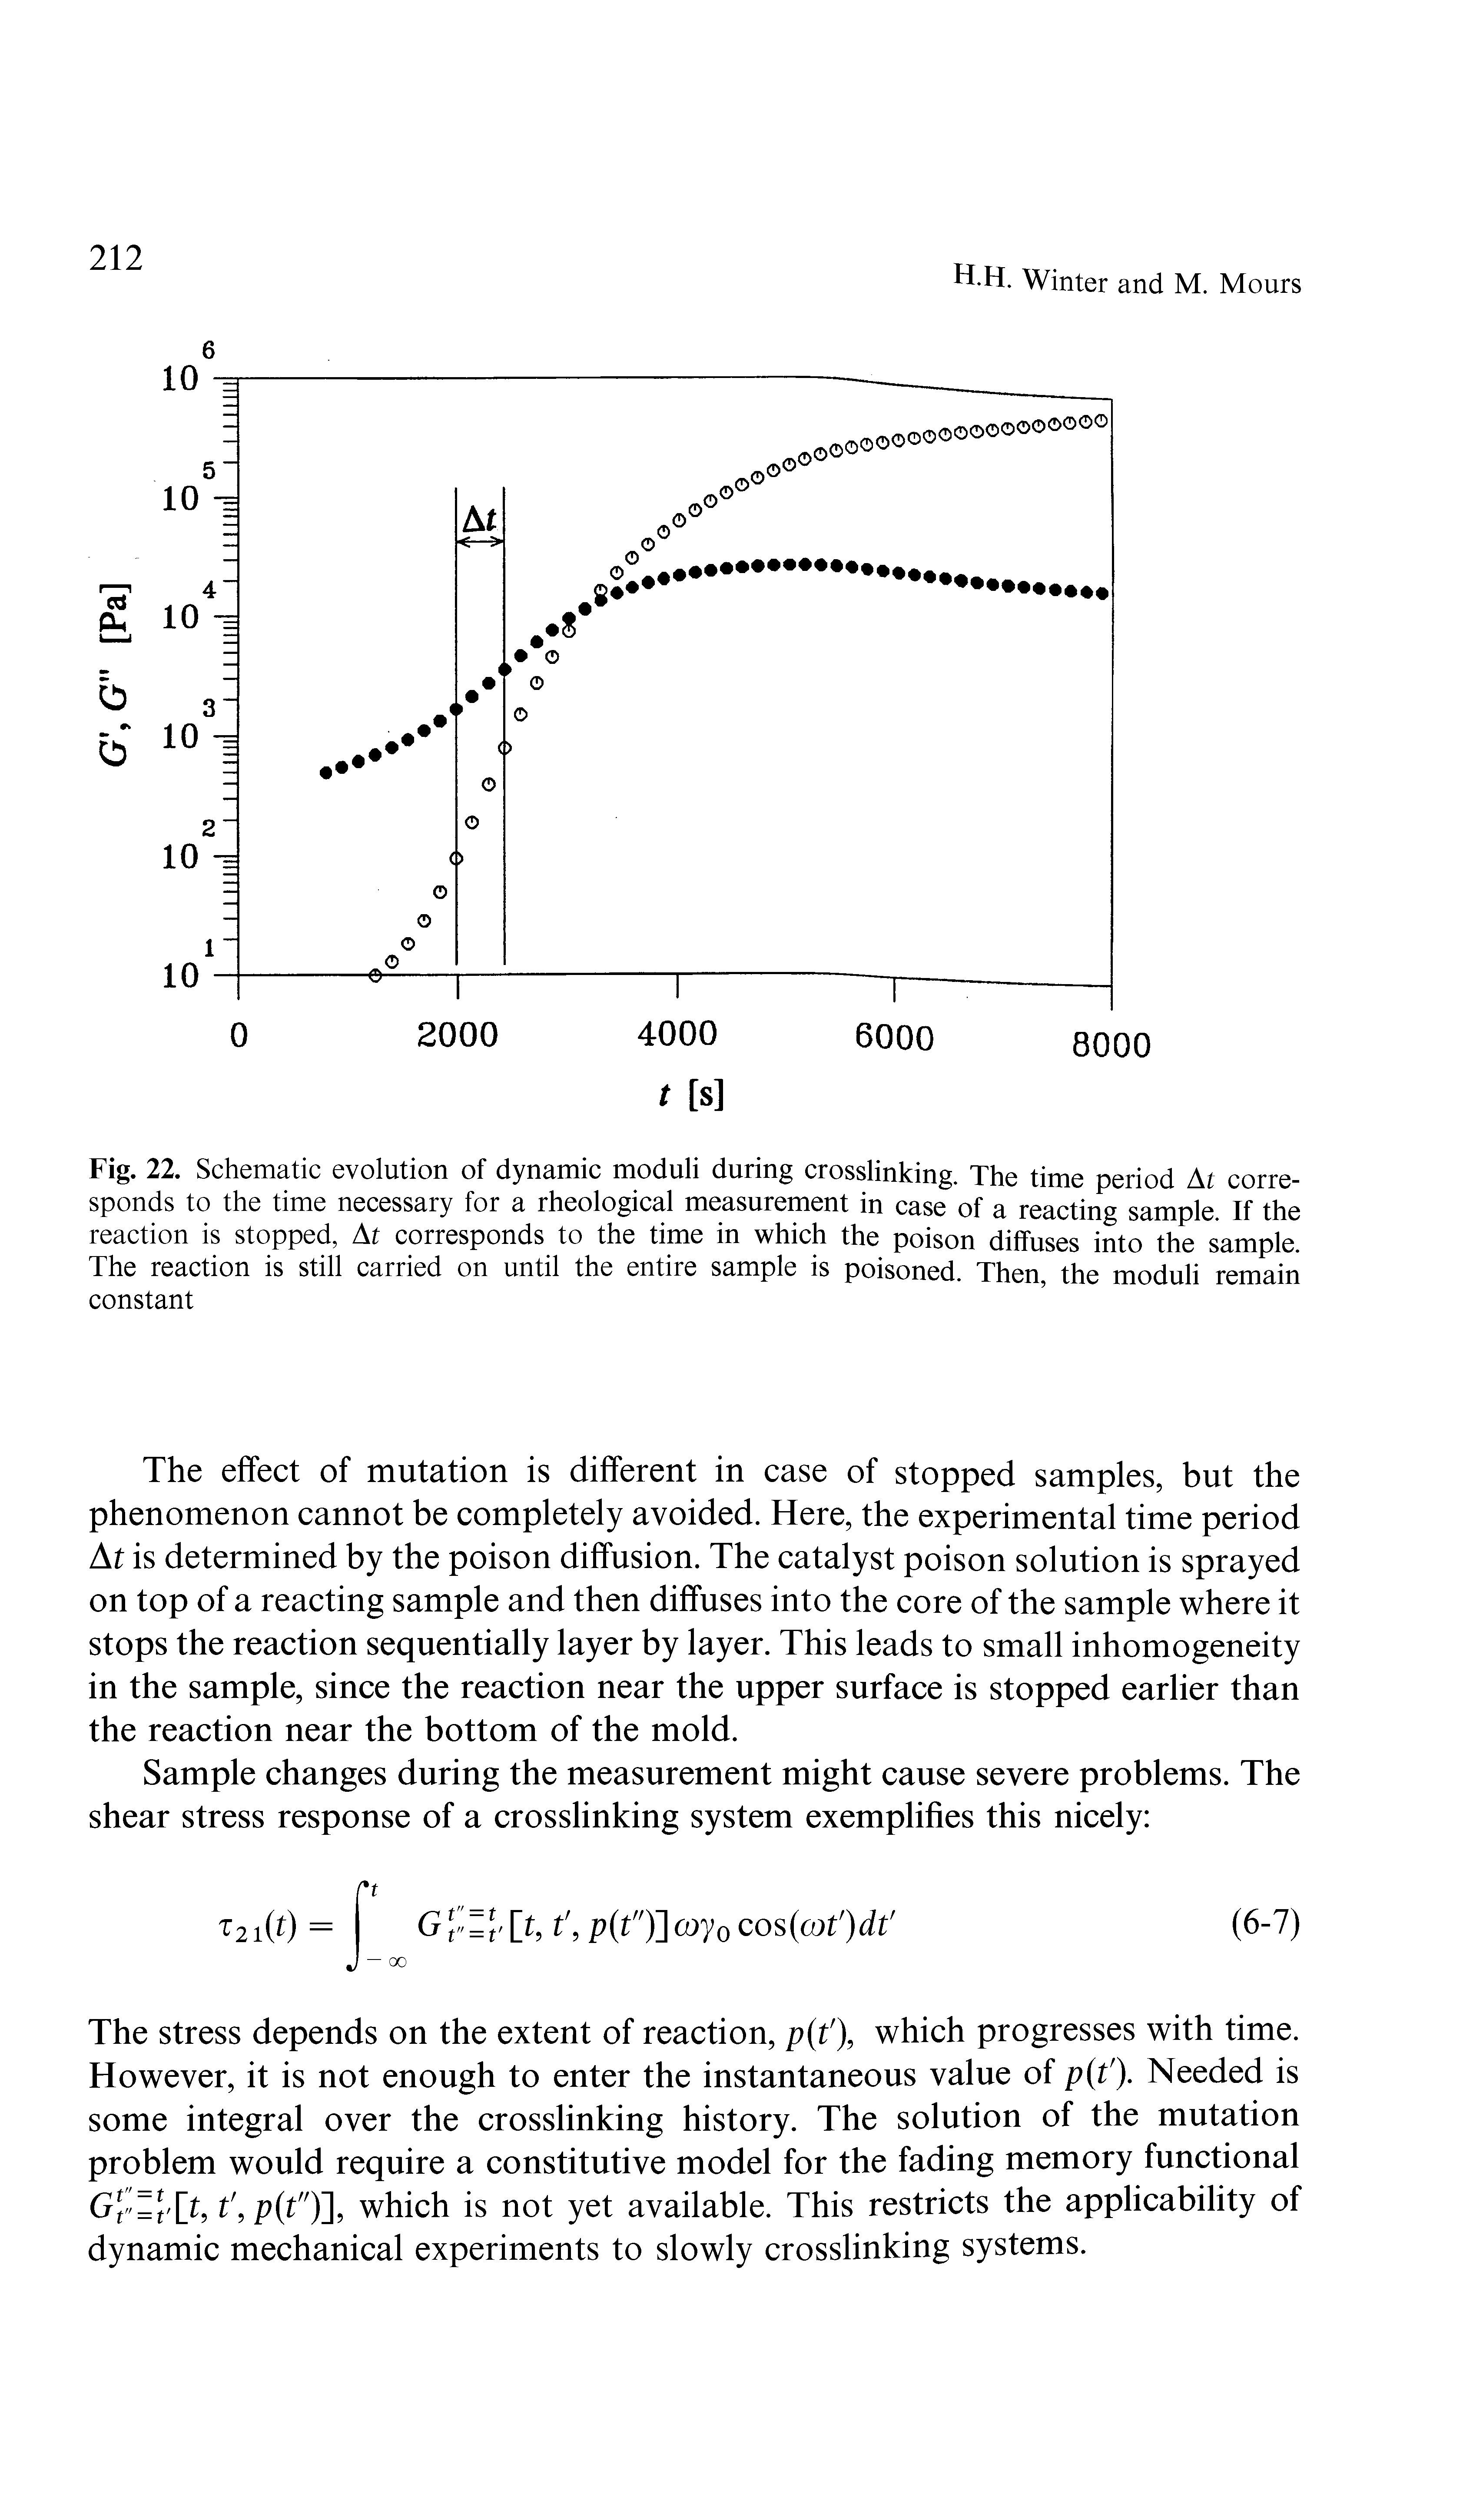 Fig. 22. Schematic evolution of dynamic moduli during crosslinking. The time period At corresponds to the time necessary for a rheological measurement in case of a reacting sample. If the reaction is stopped, At corresponds to the time in which the poison diffuses into the sample. The reaction is still carried on until the entire sample is poisoned. Then the moduli remain constant...